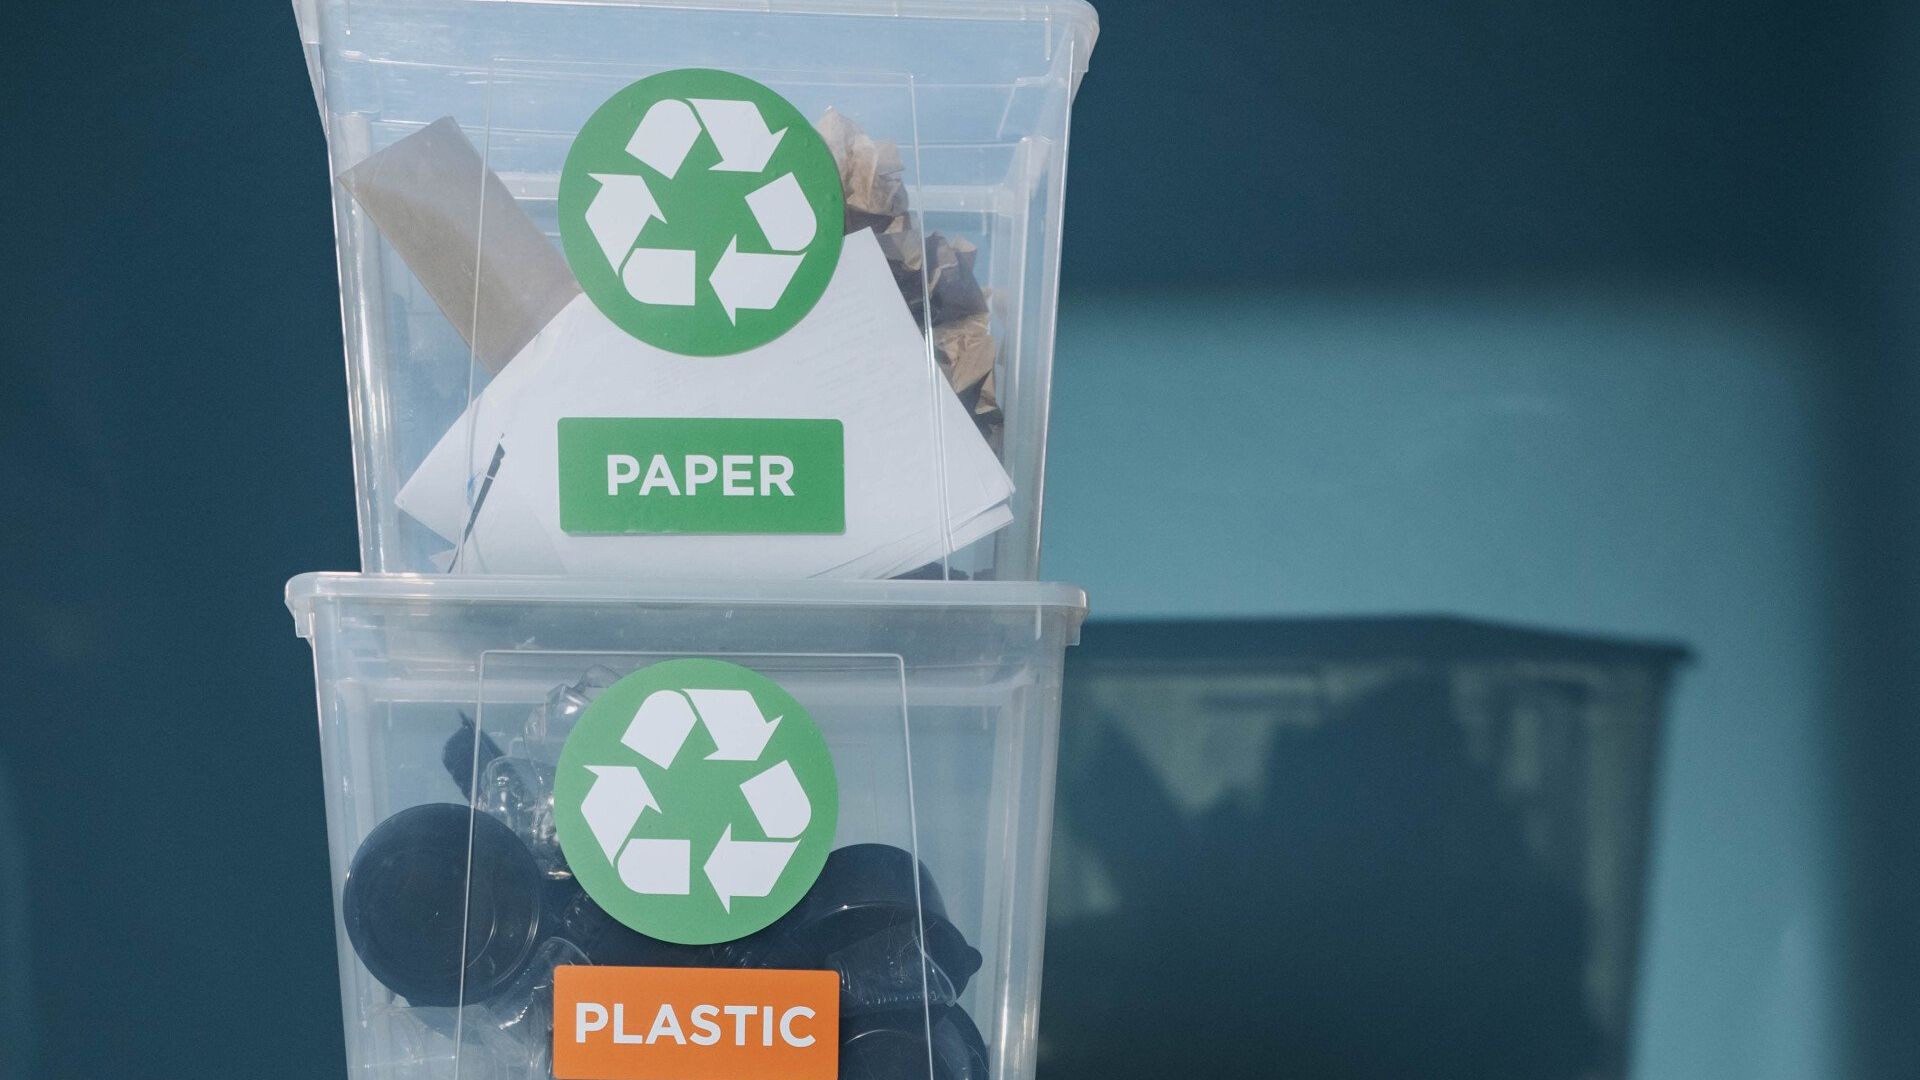 Recycling boxes with labels